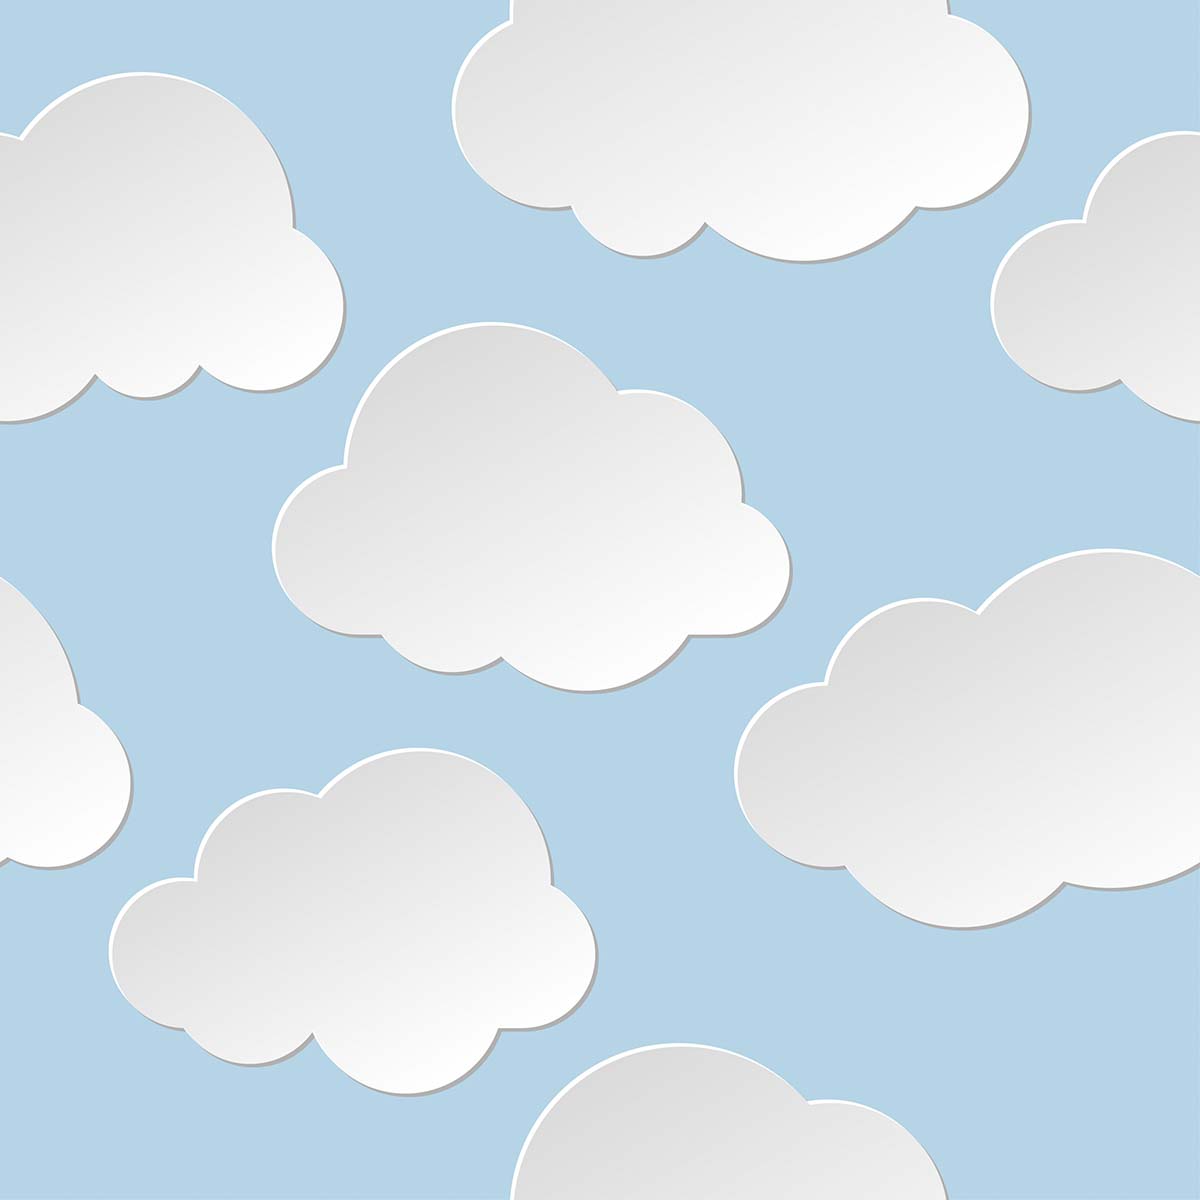 A group of white clouds on a blue background